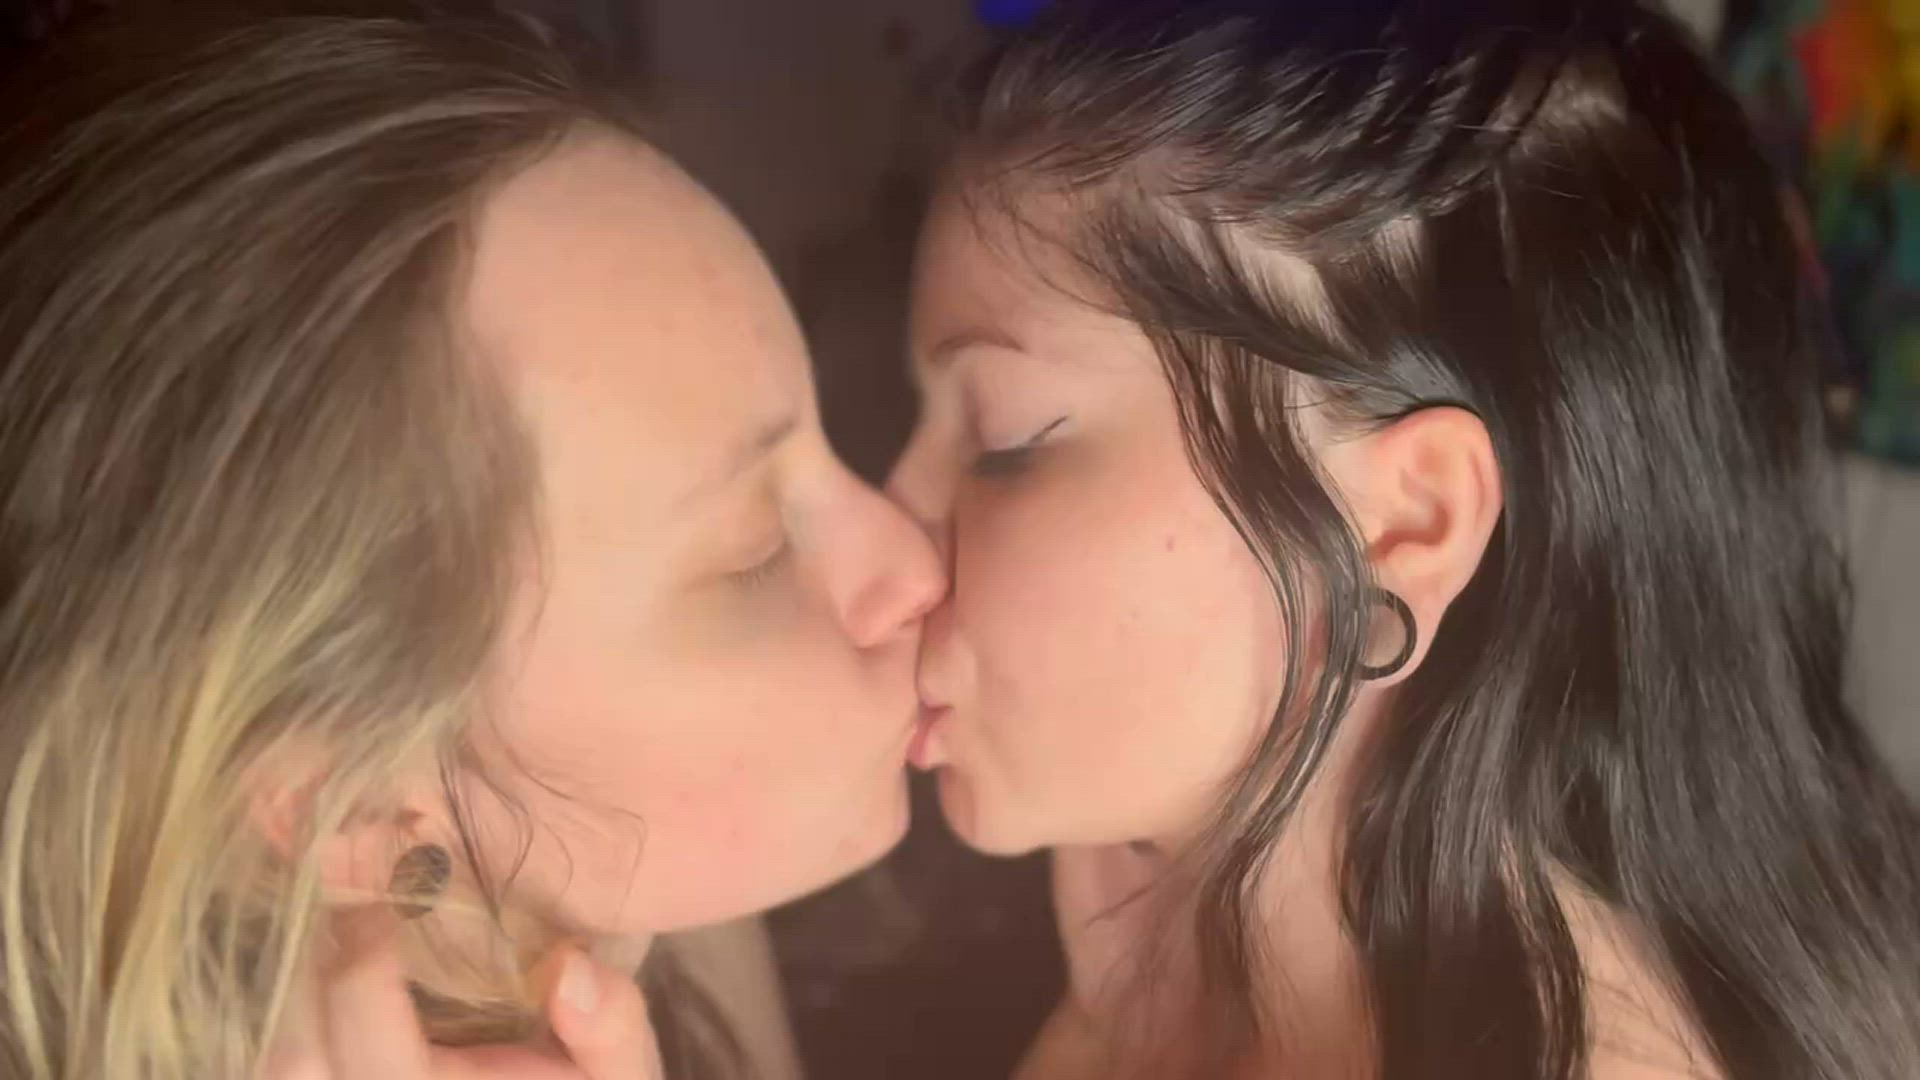 Lesbian porn video with onlyfans model kaydxnrae <strong>@kaydxn.rae</strong>